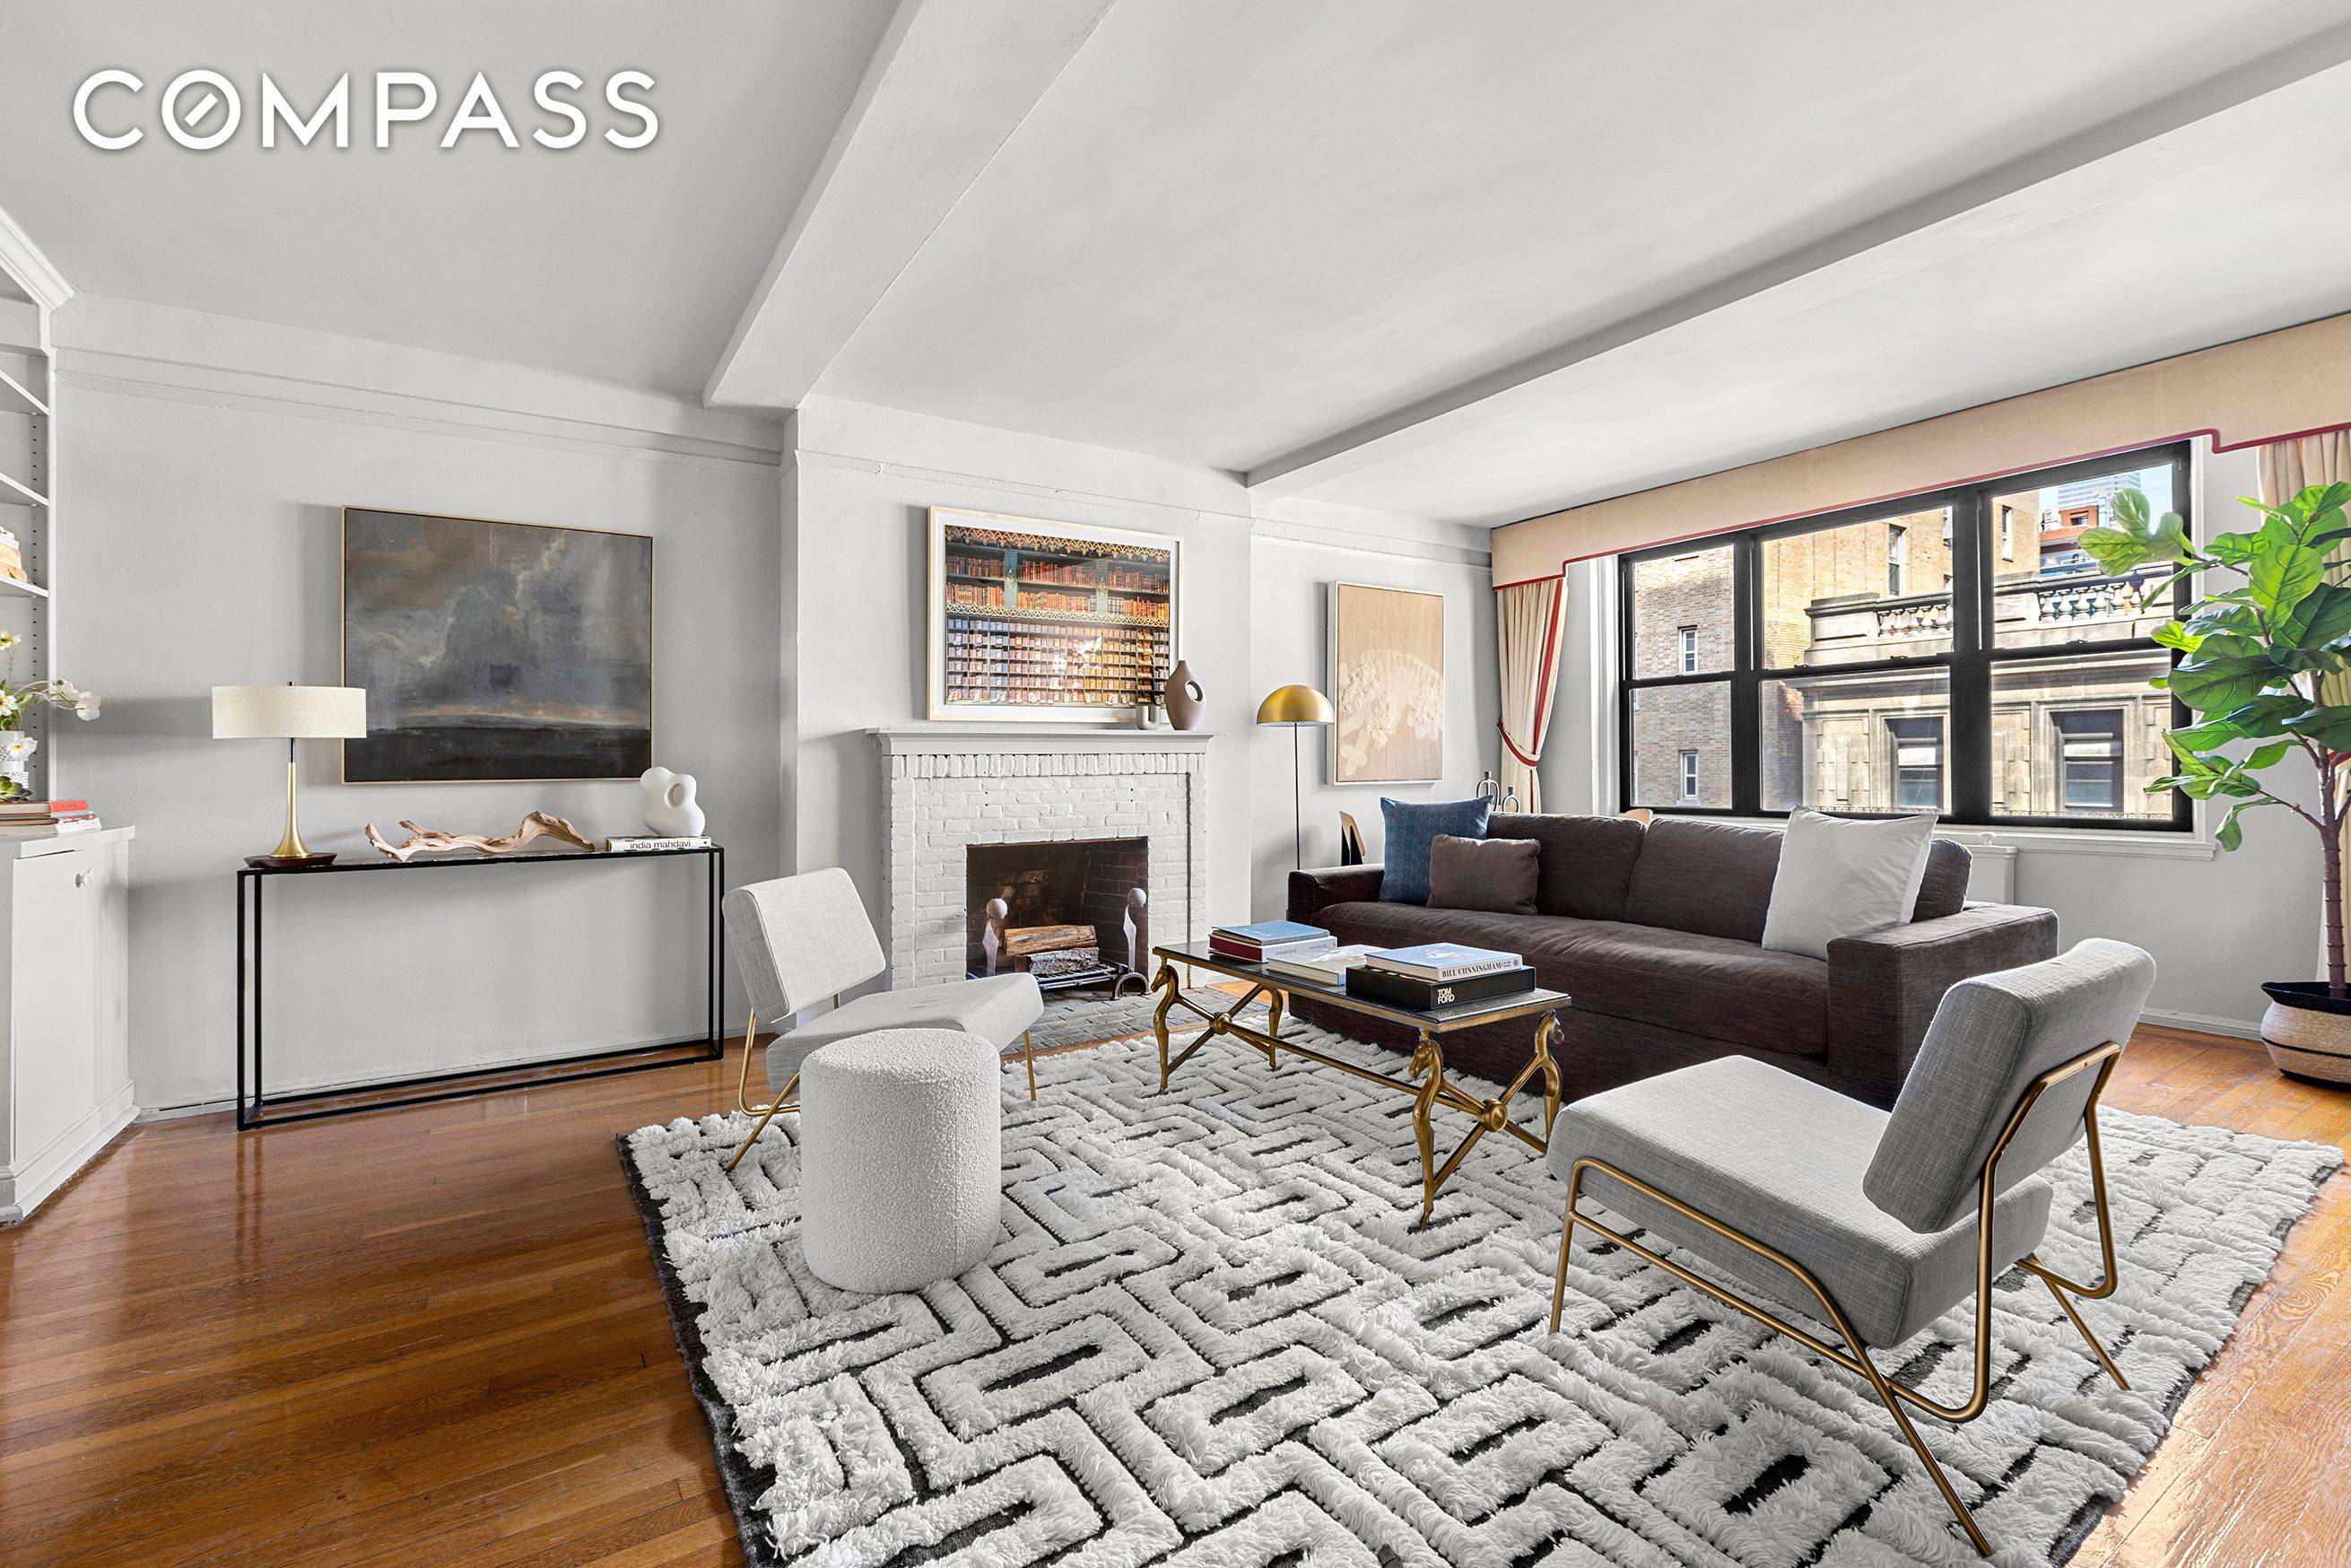 Apartment 7F at 140 East 28th Street is an oversized one bedroom with open exposures, charming architectural details, a wood burning fireplace, and all the additional details you would expect ...